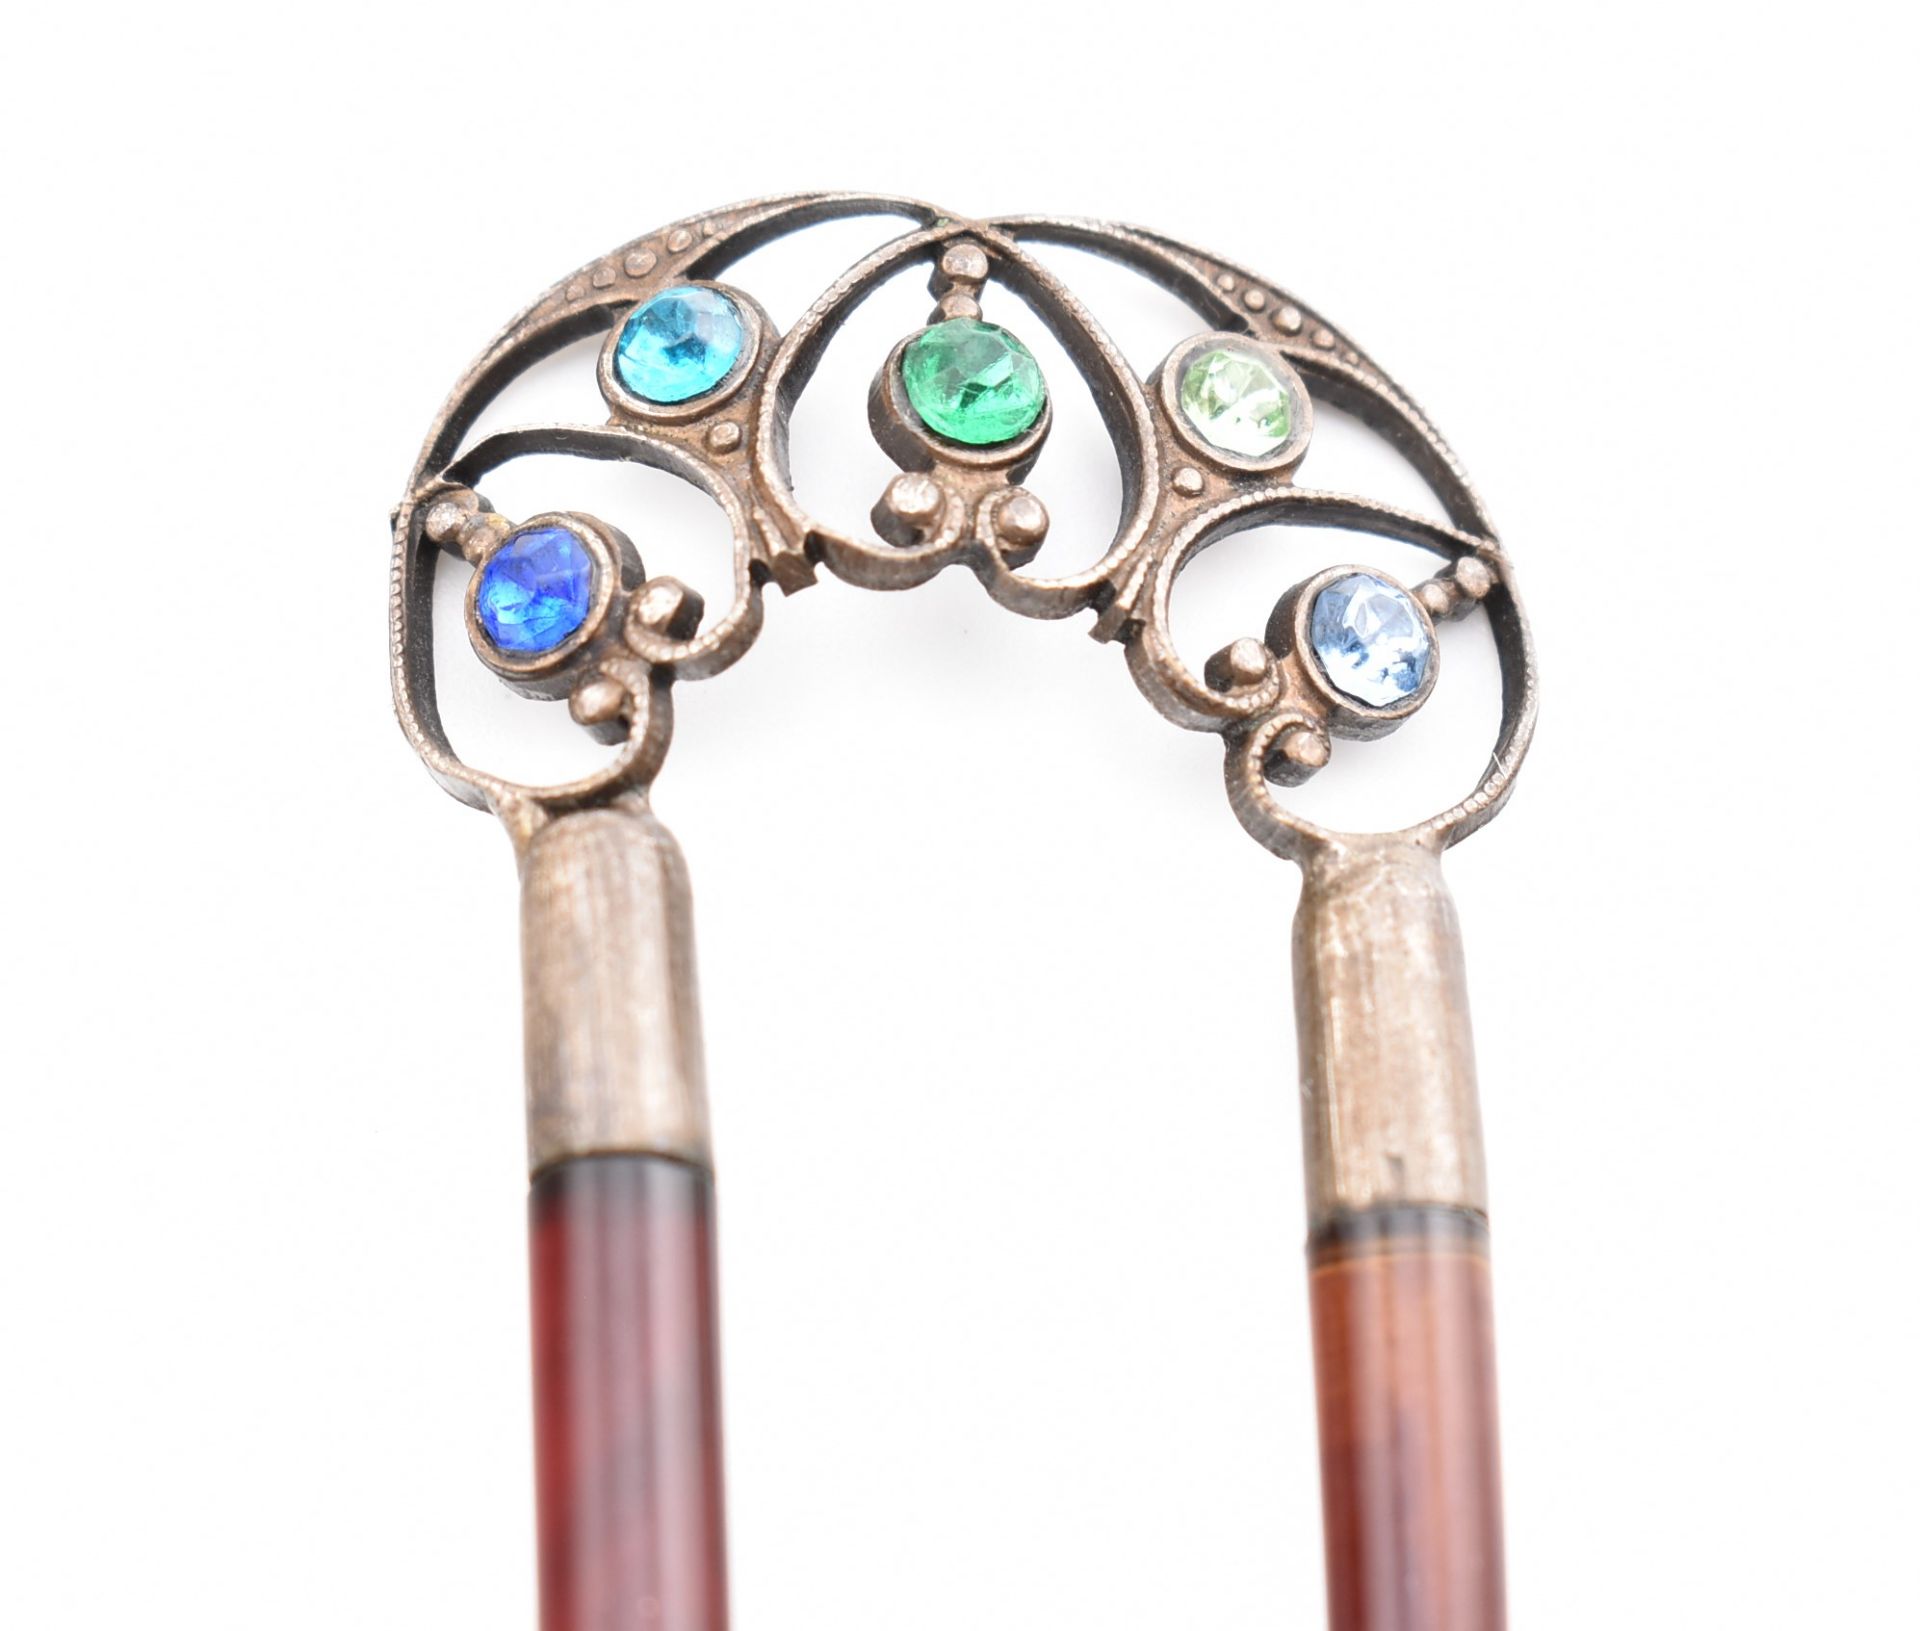 ART NOUVEAU BEJEWELLED HAIR COMBE - Image 3 of 3